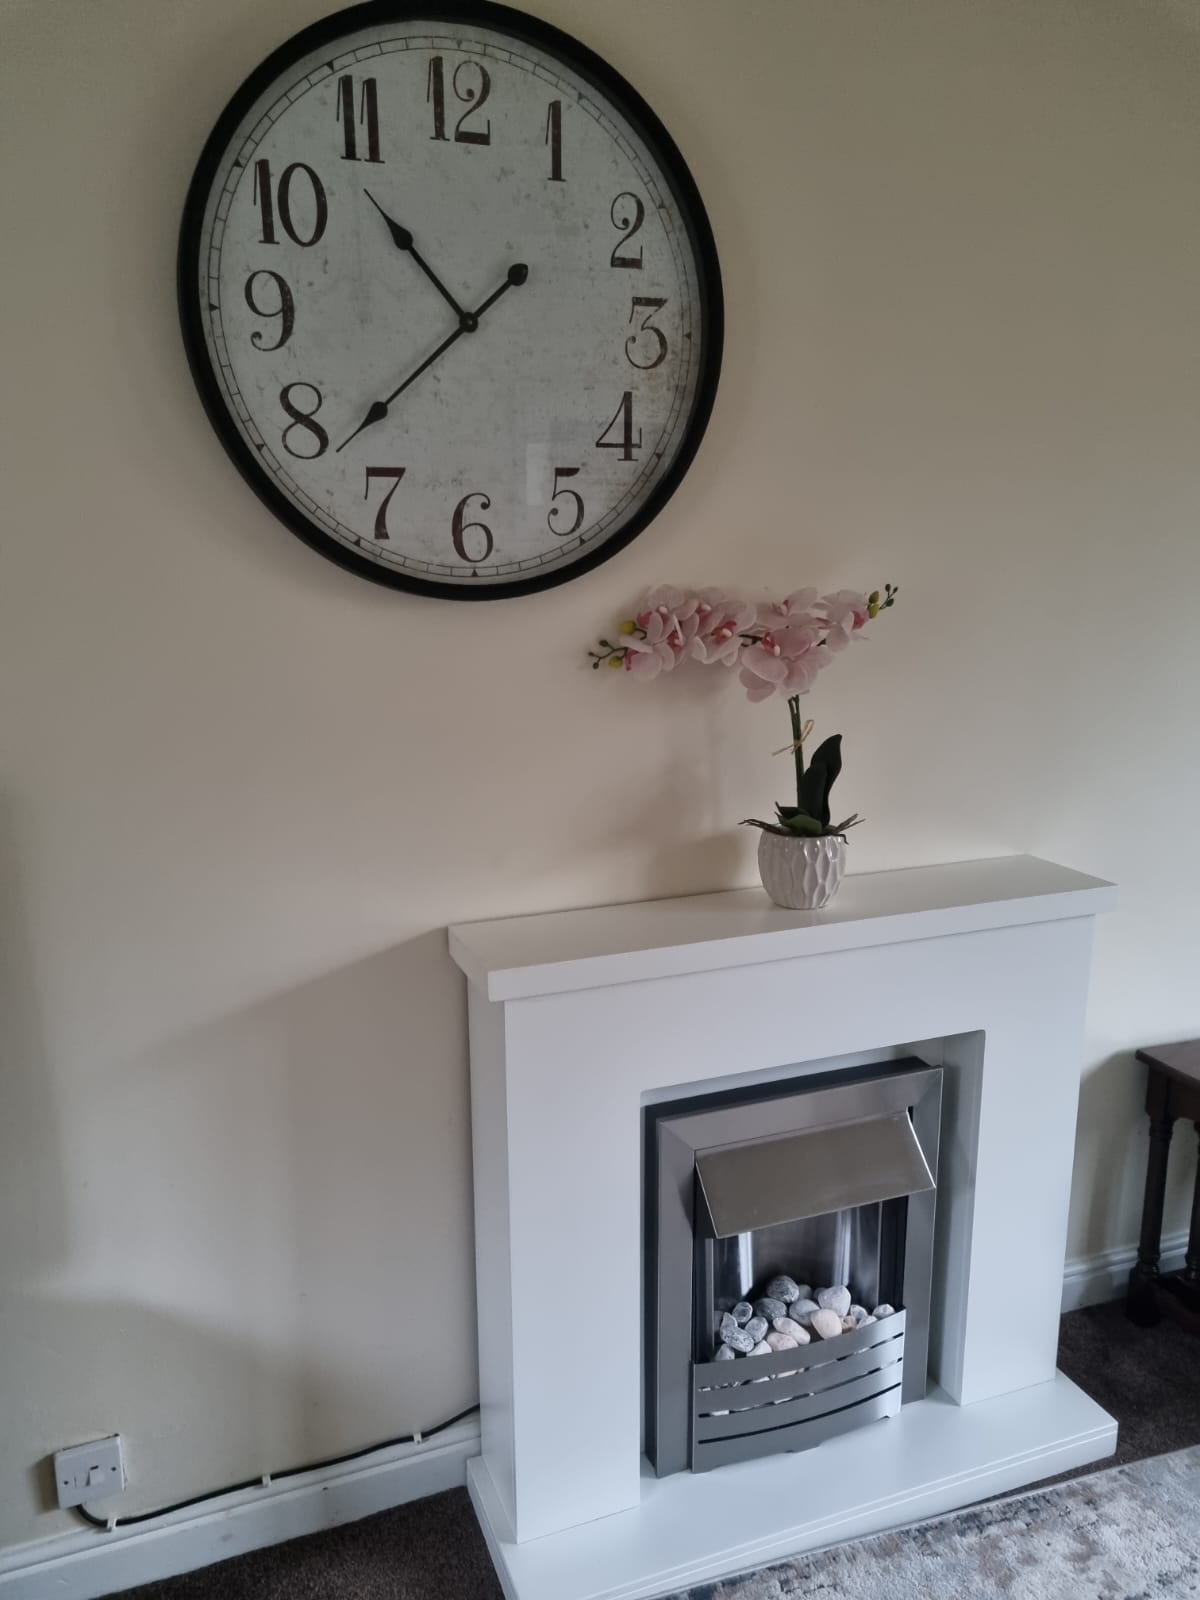 Fireplace with a clock above it in Granary cottage